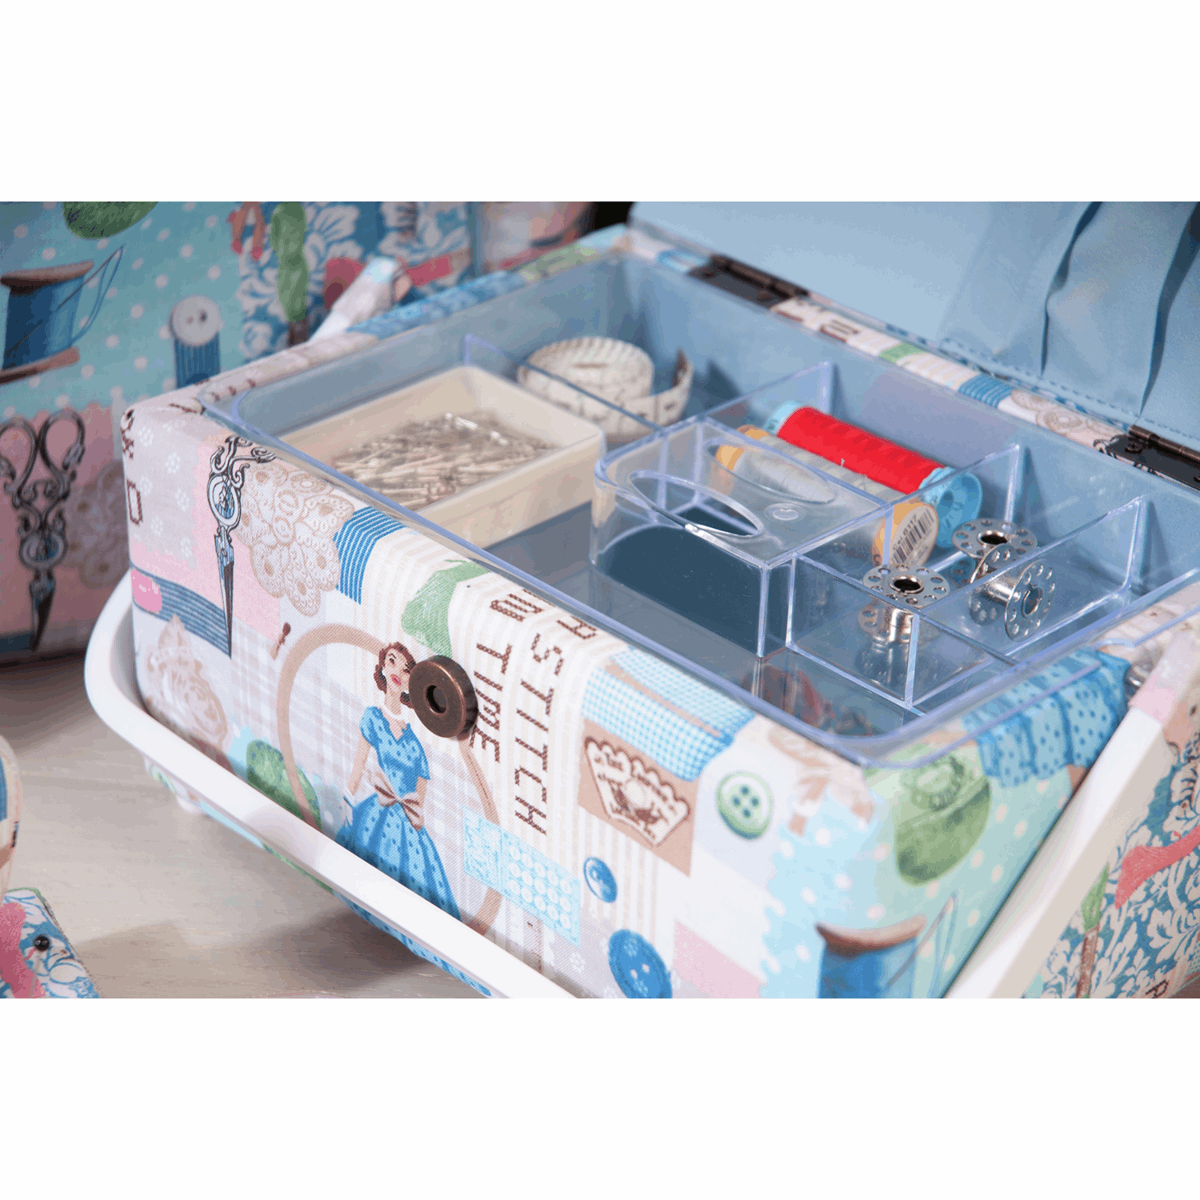 Make Do and Mend Sewing Box with Handle - Medium